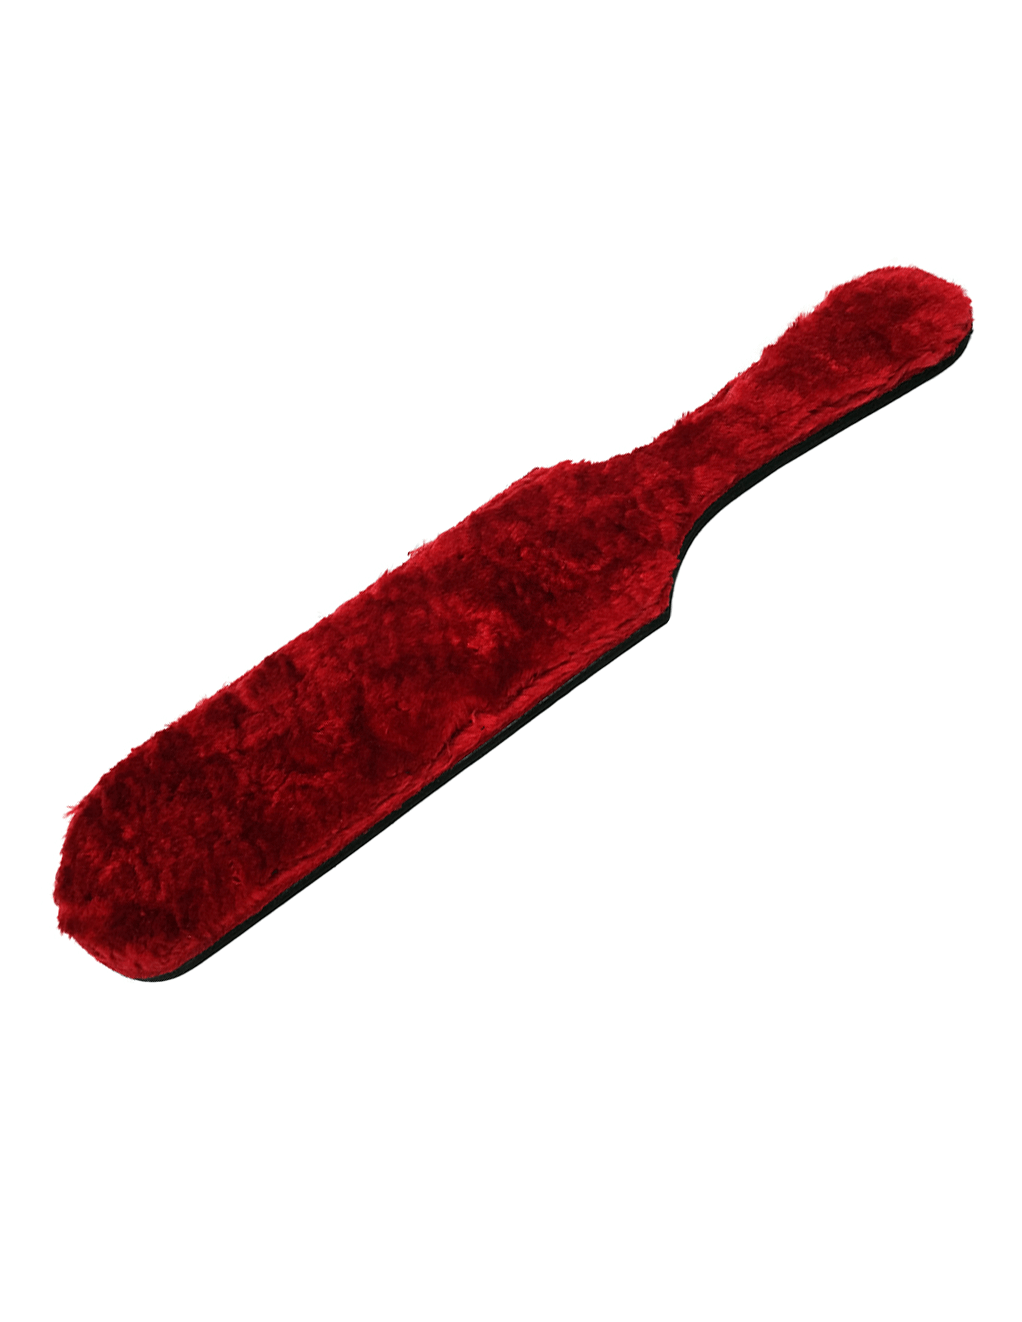 Rouge Leather & Fur Paddle - Black/Red - Main